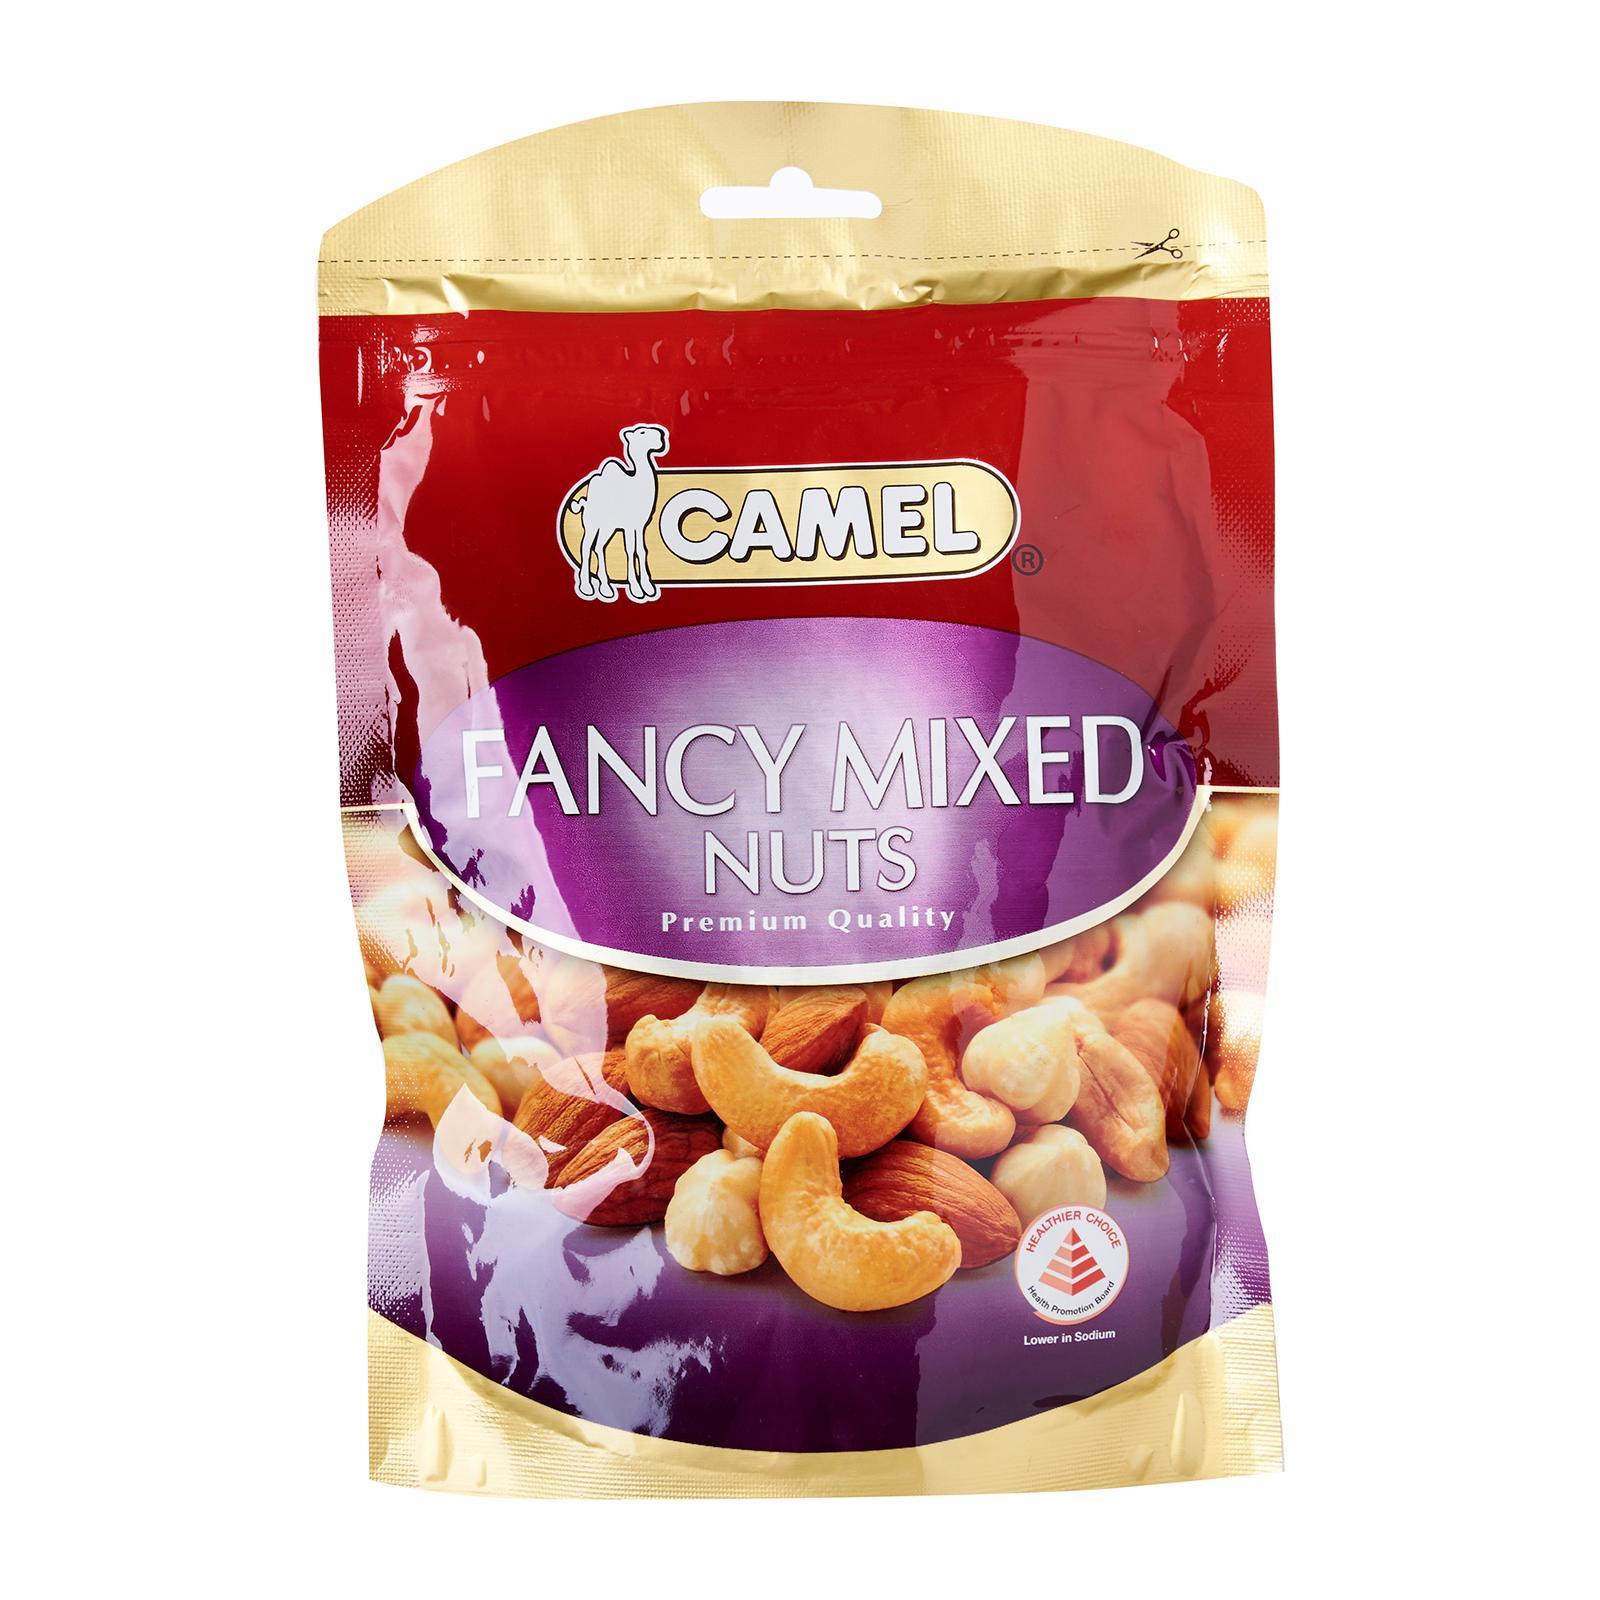 Camel Fancy Mix Nuts things to buy in Singapore, What is Singapore famous to buy?, What should I buy from Singapore?, What can you buy only in Singapore?, What souvenirs are found in Singapore?, what to buy in Singapore, must buy in singapore supermarket, best singapore gifts for overseas friends, things to buy in singapore cheap, best things to buy in singapore airport, unique singapore gifts, singapore souvenir shop online,  singapore souvenirs, Singapore snacks to bring home, 